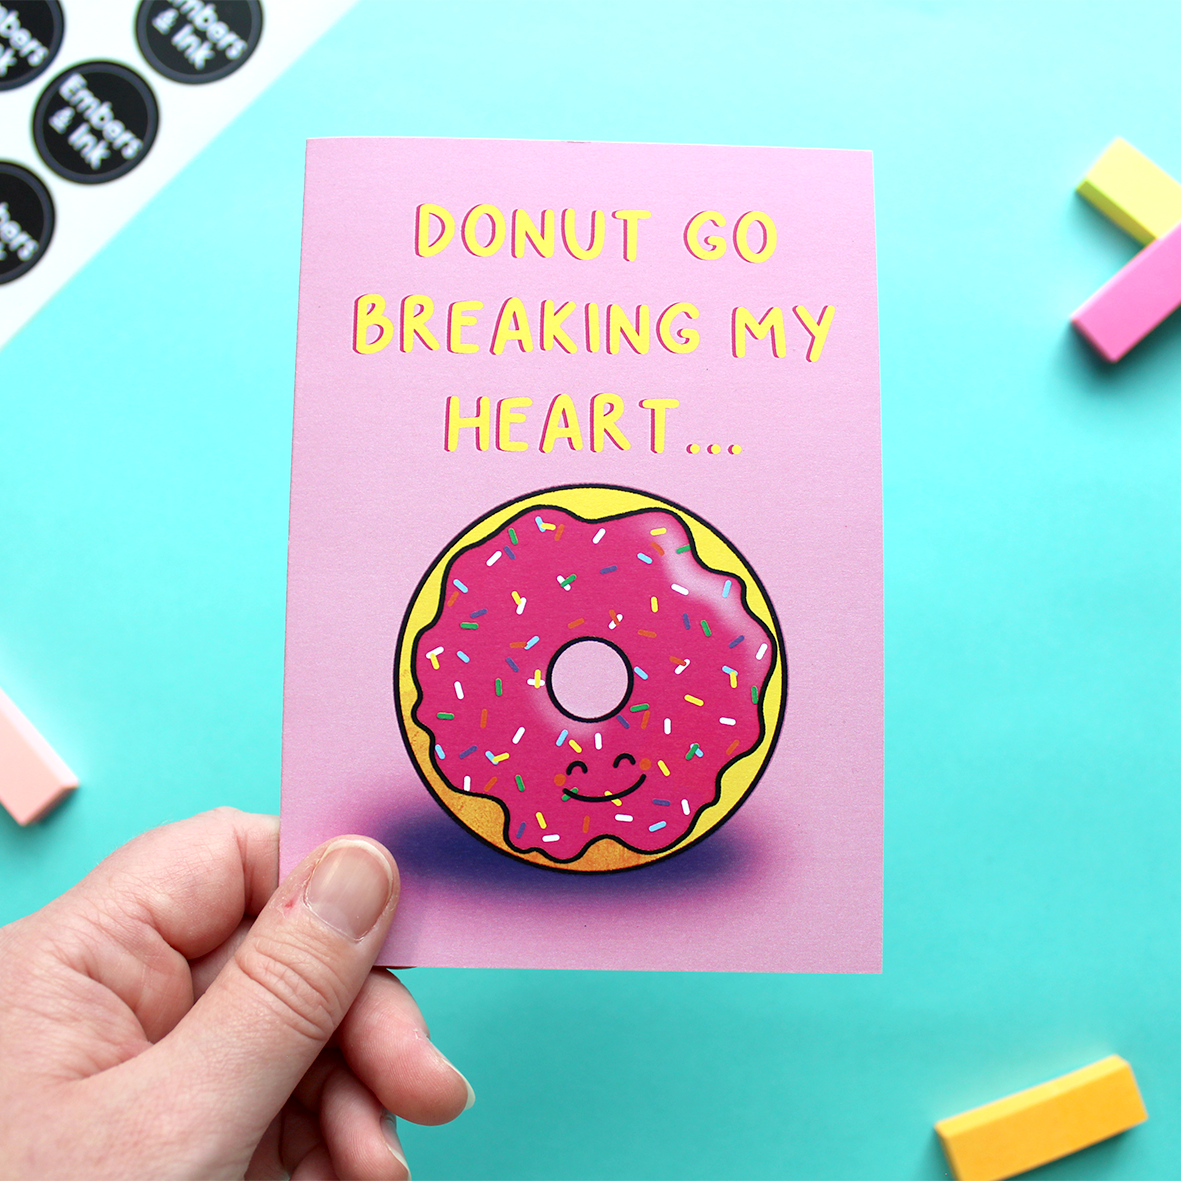 A hand holds a card that shows an illustration of a smiling iced donut, underneath the words 'donut go breaking my heart'. The background is pink.